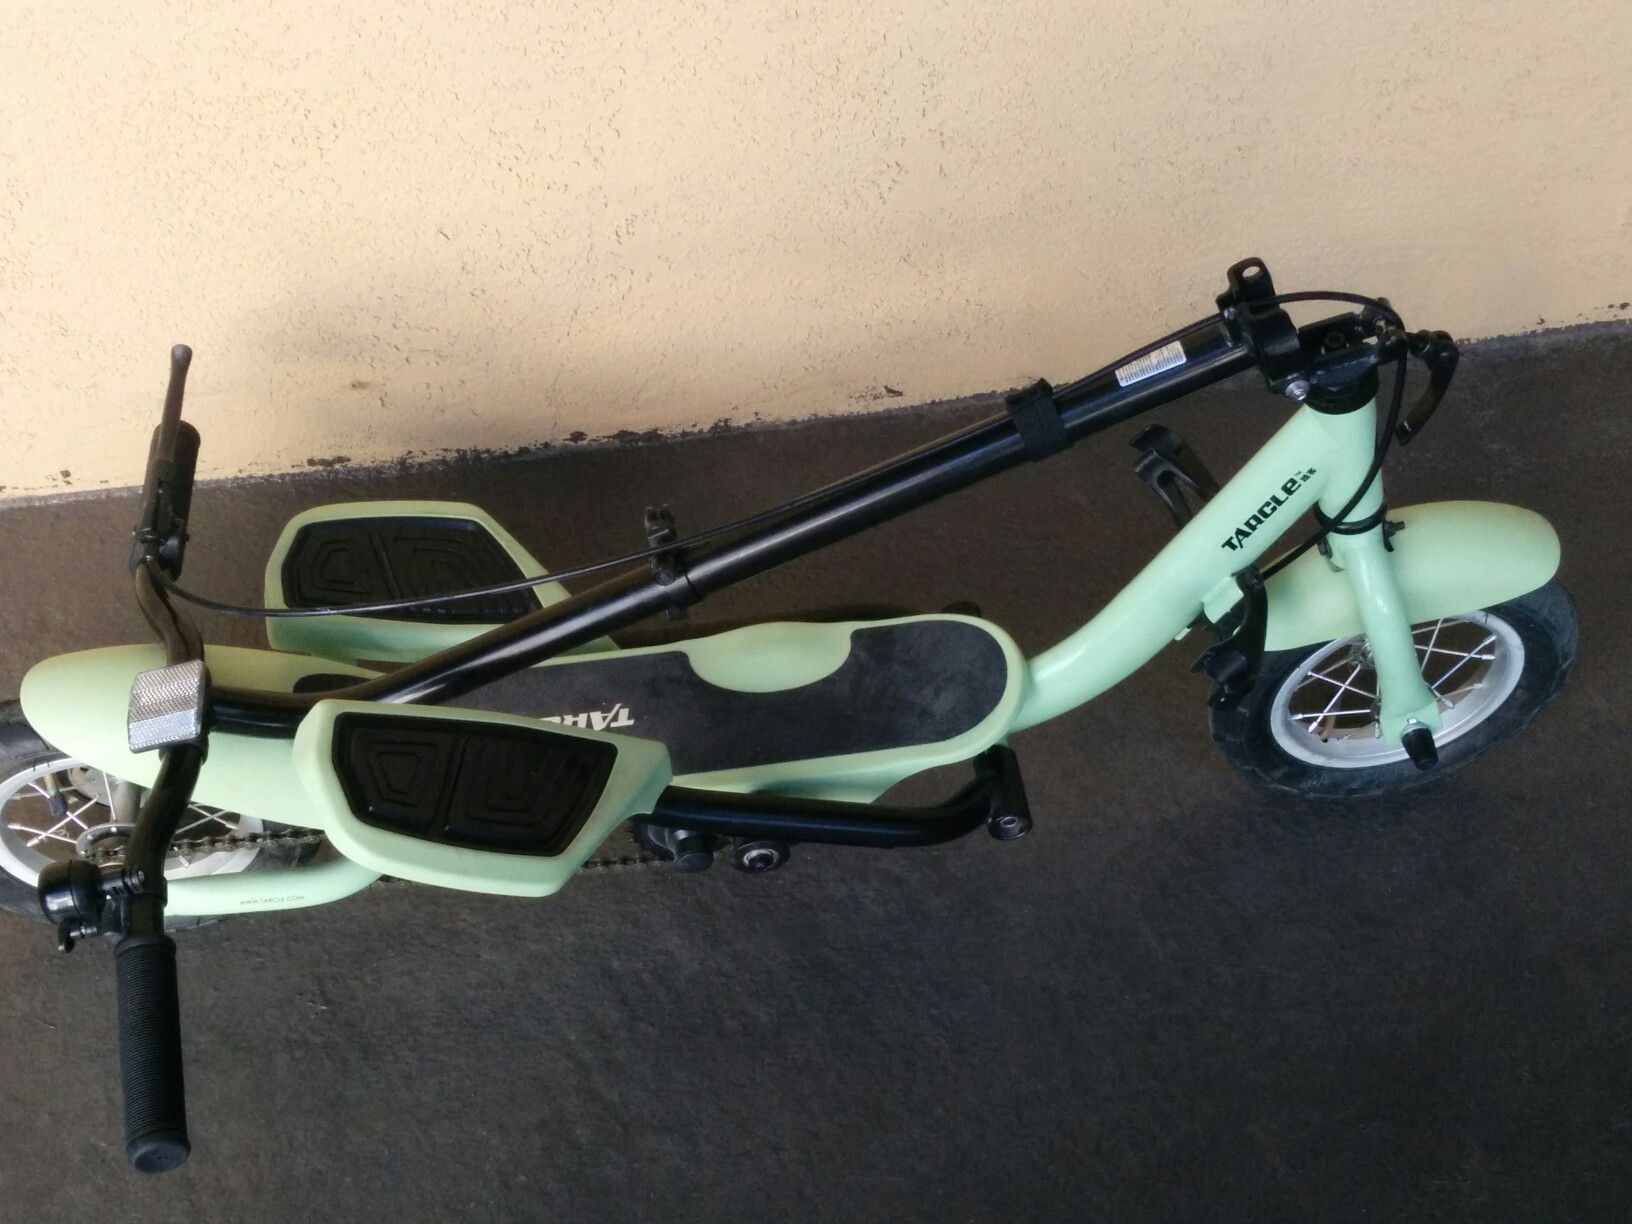 TARCLE Adult Fitness Pedal Scooter for Sale in Albuquerque, - OfferUp